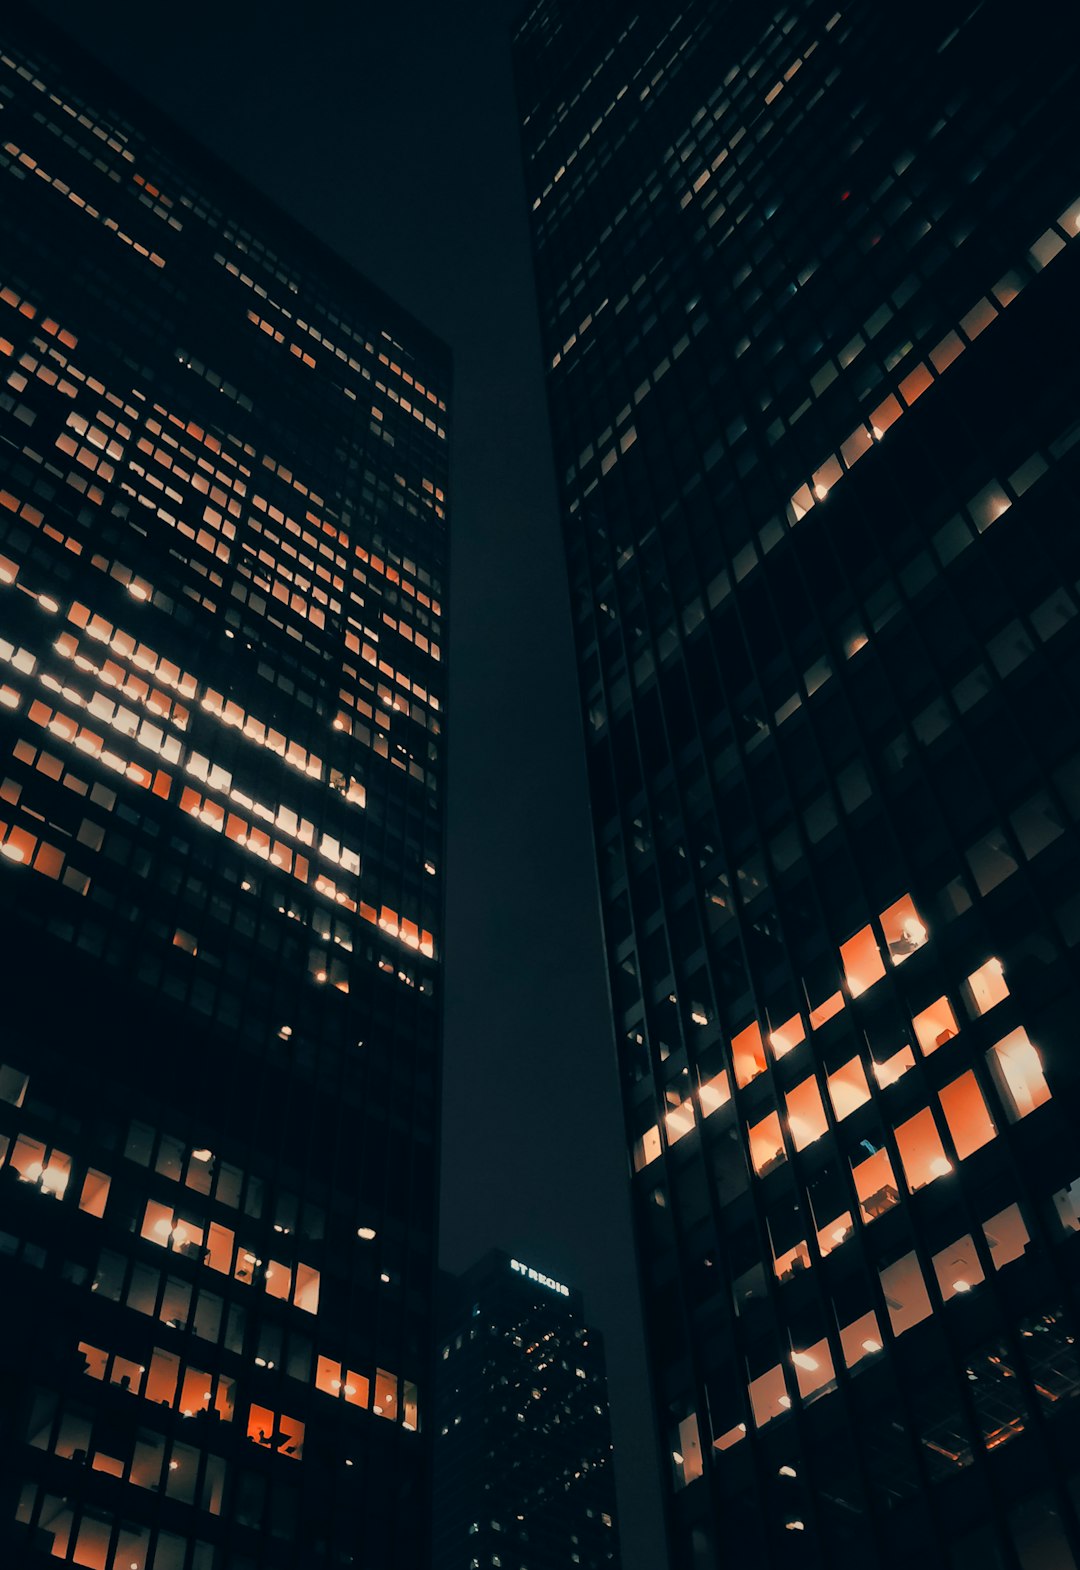 curtain wall building during nighttime photo – Free City Image on Unsplash